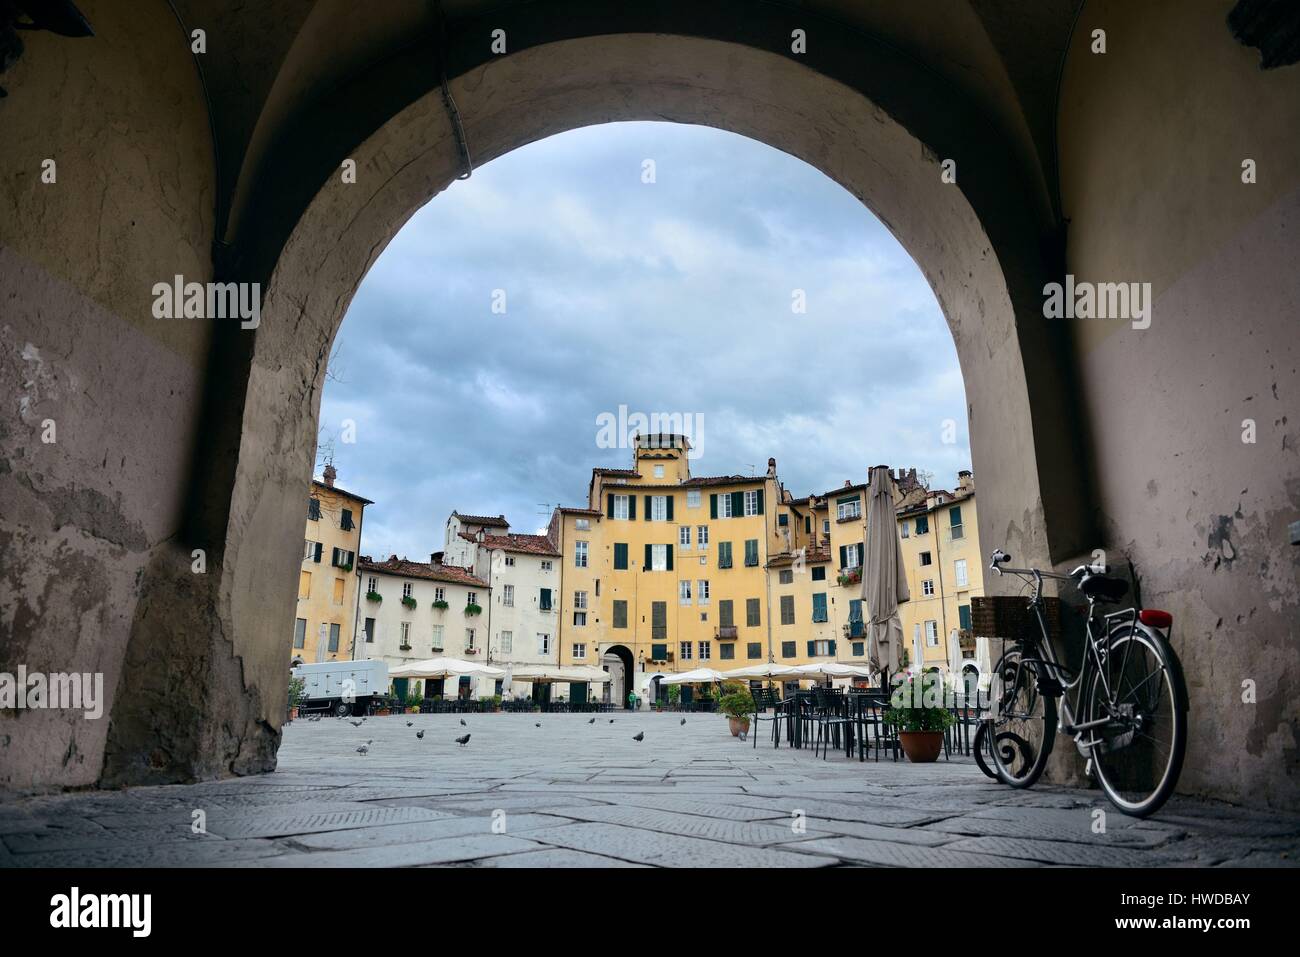 Arch entrance of Piazza dell Anfiteatro in Lucca Italy Stock Photo